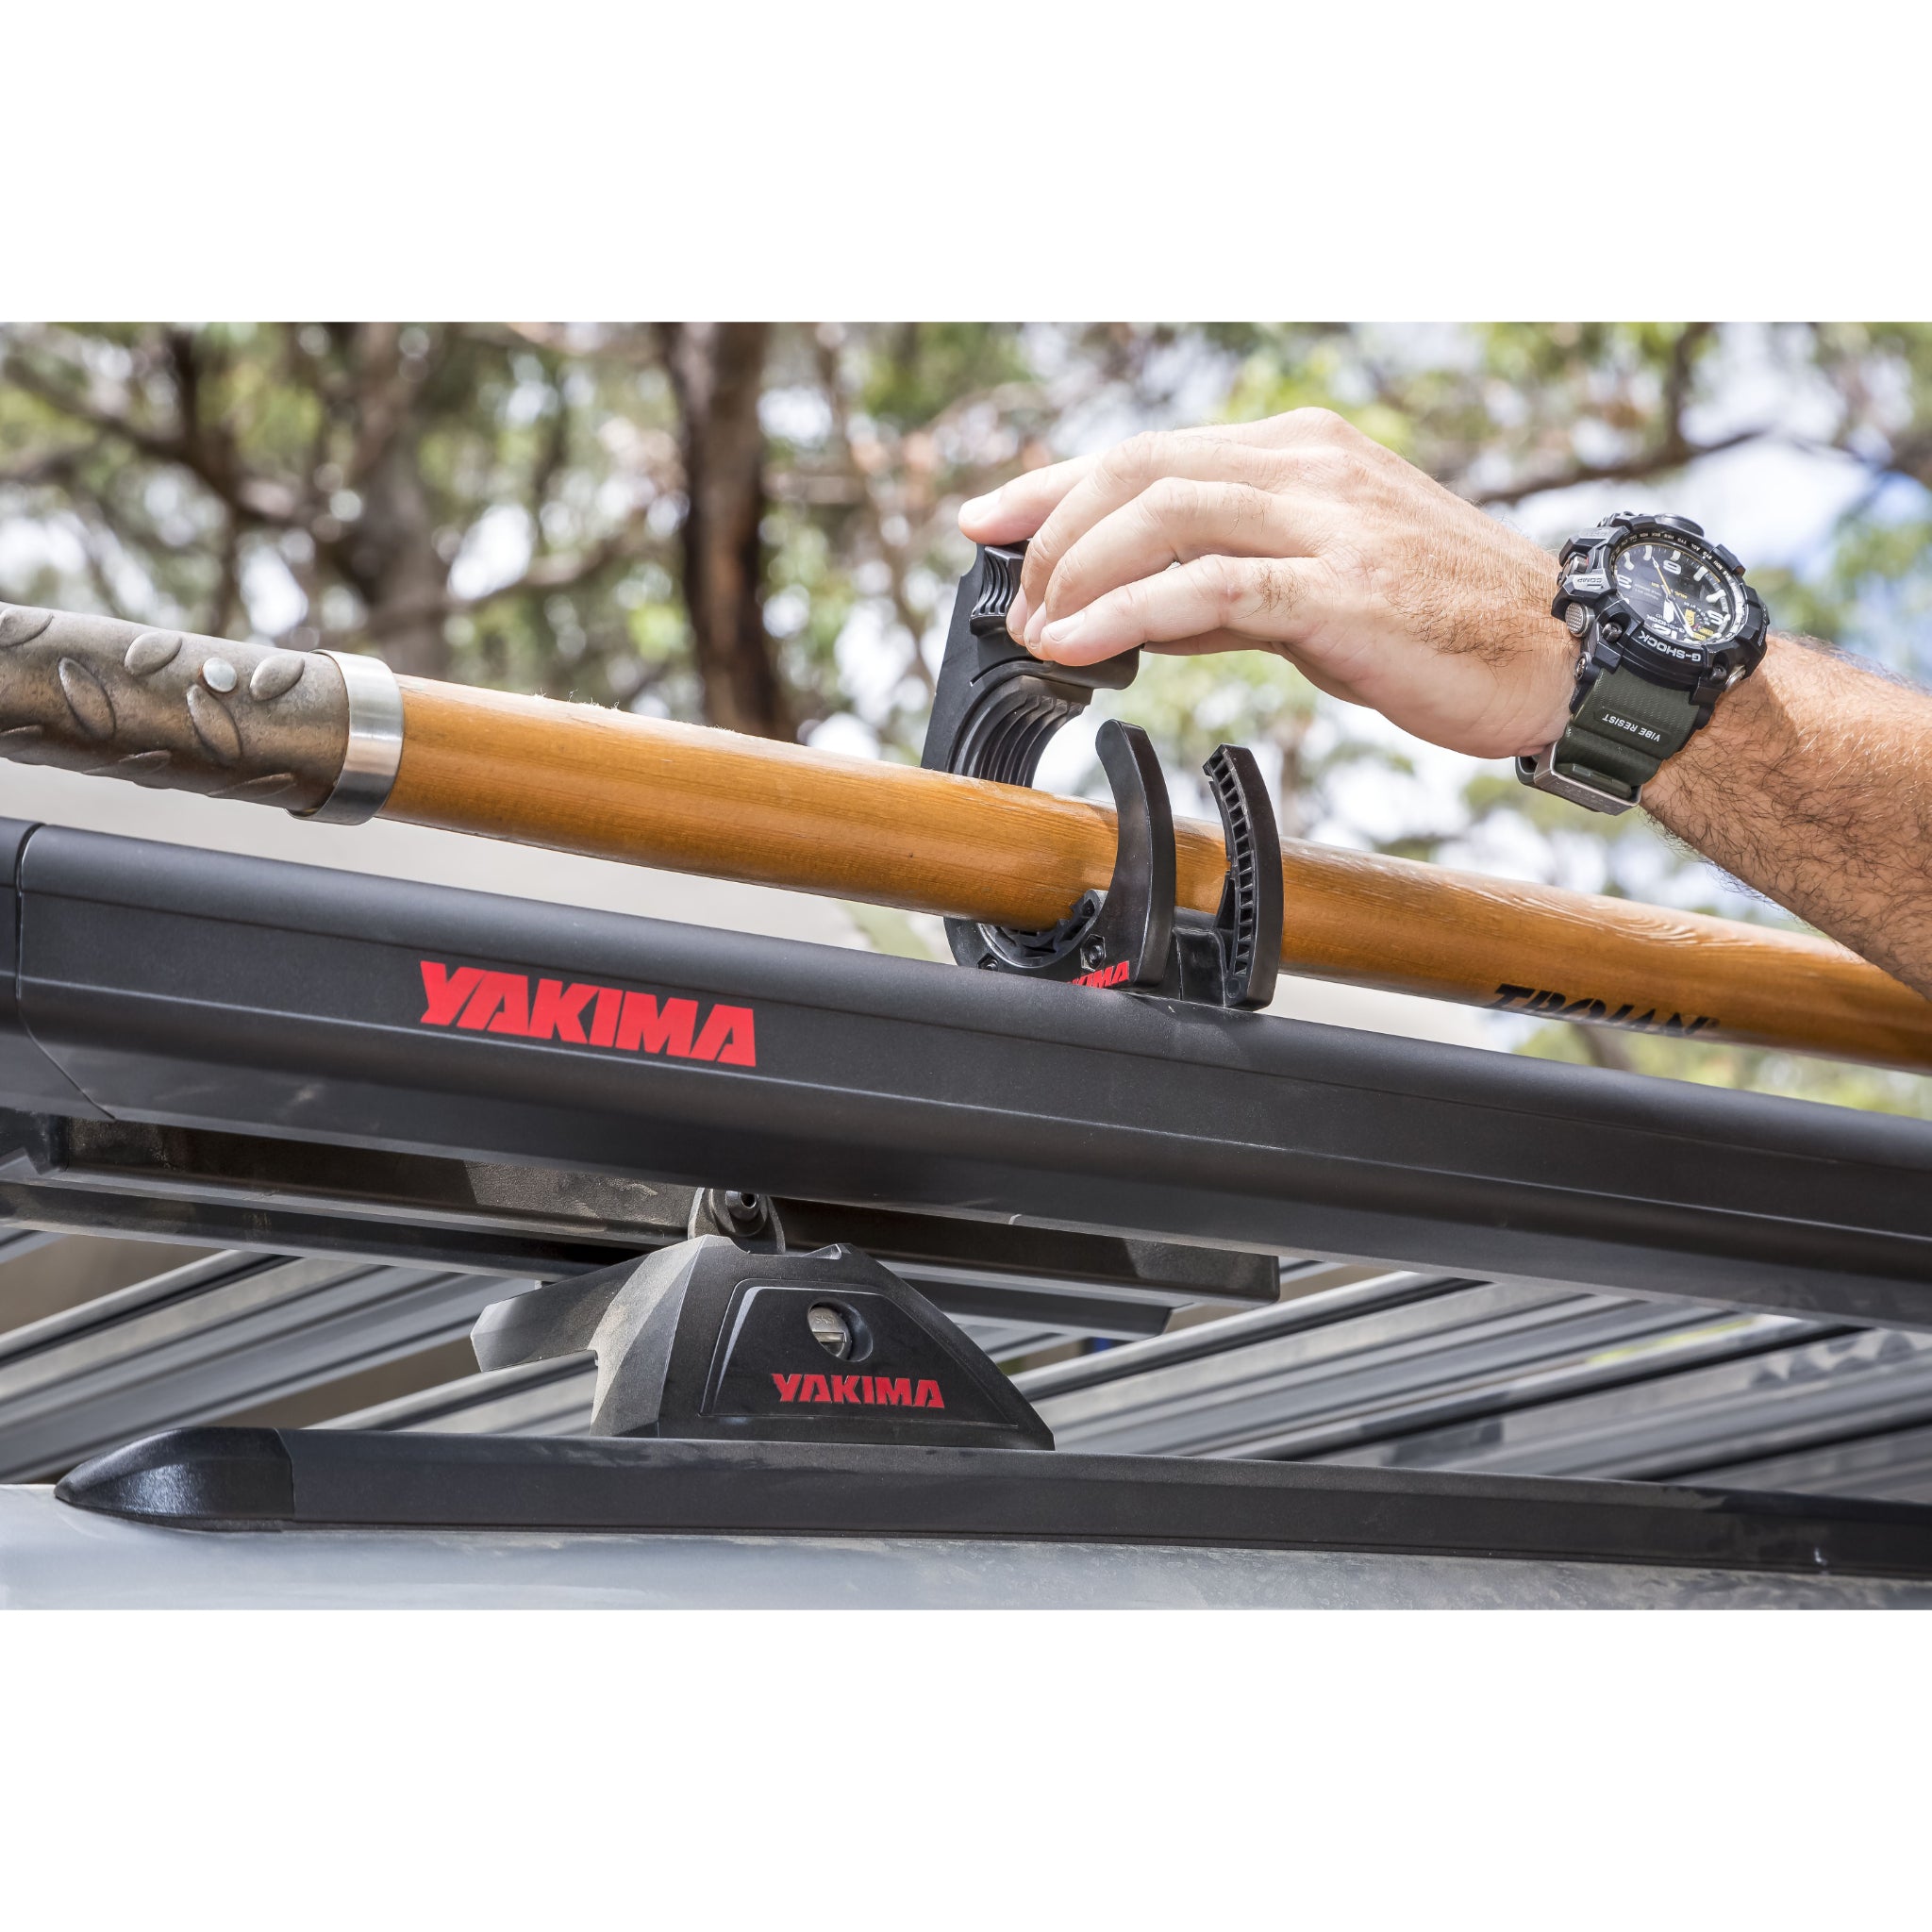 Roof Rack Paddle Holder, Accessories for Roof Racks